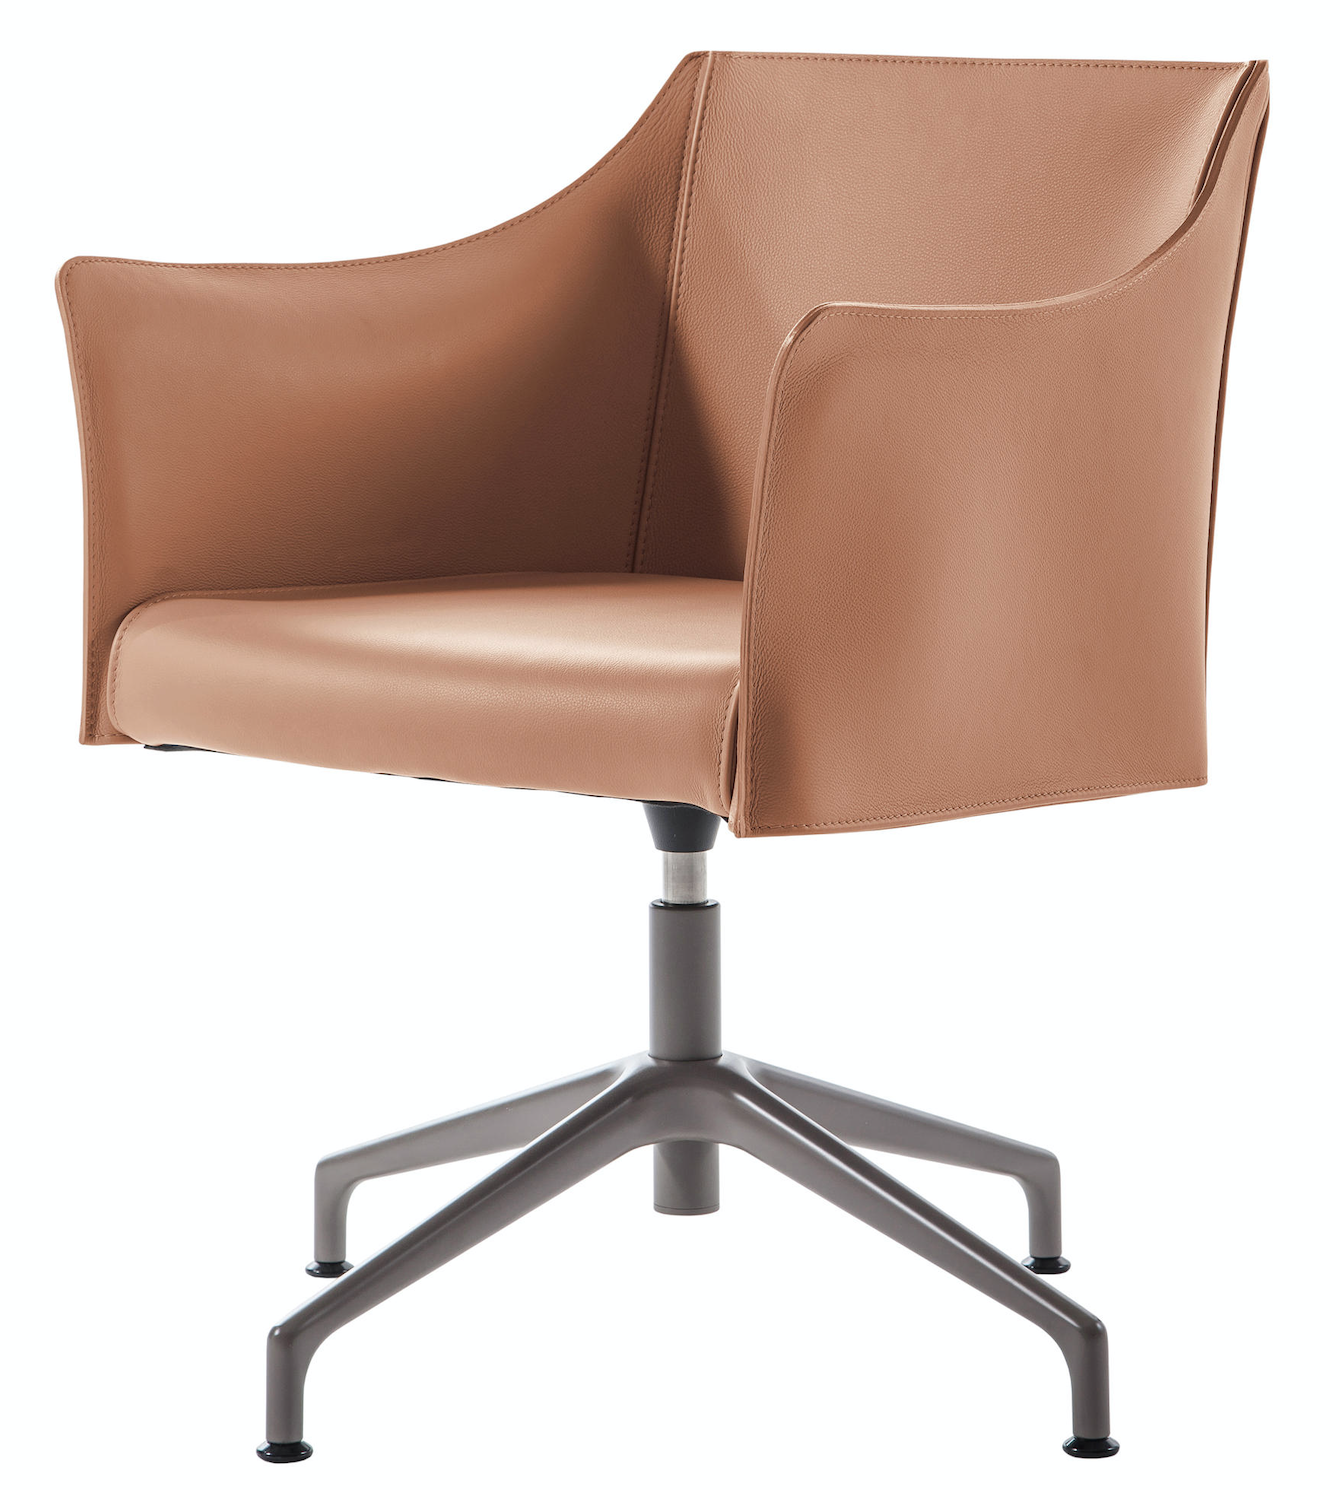 Product Image o-cap chair